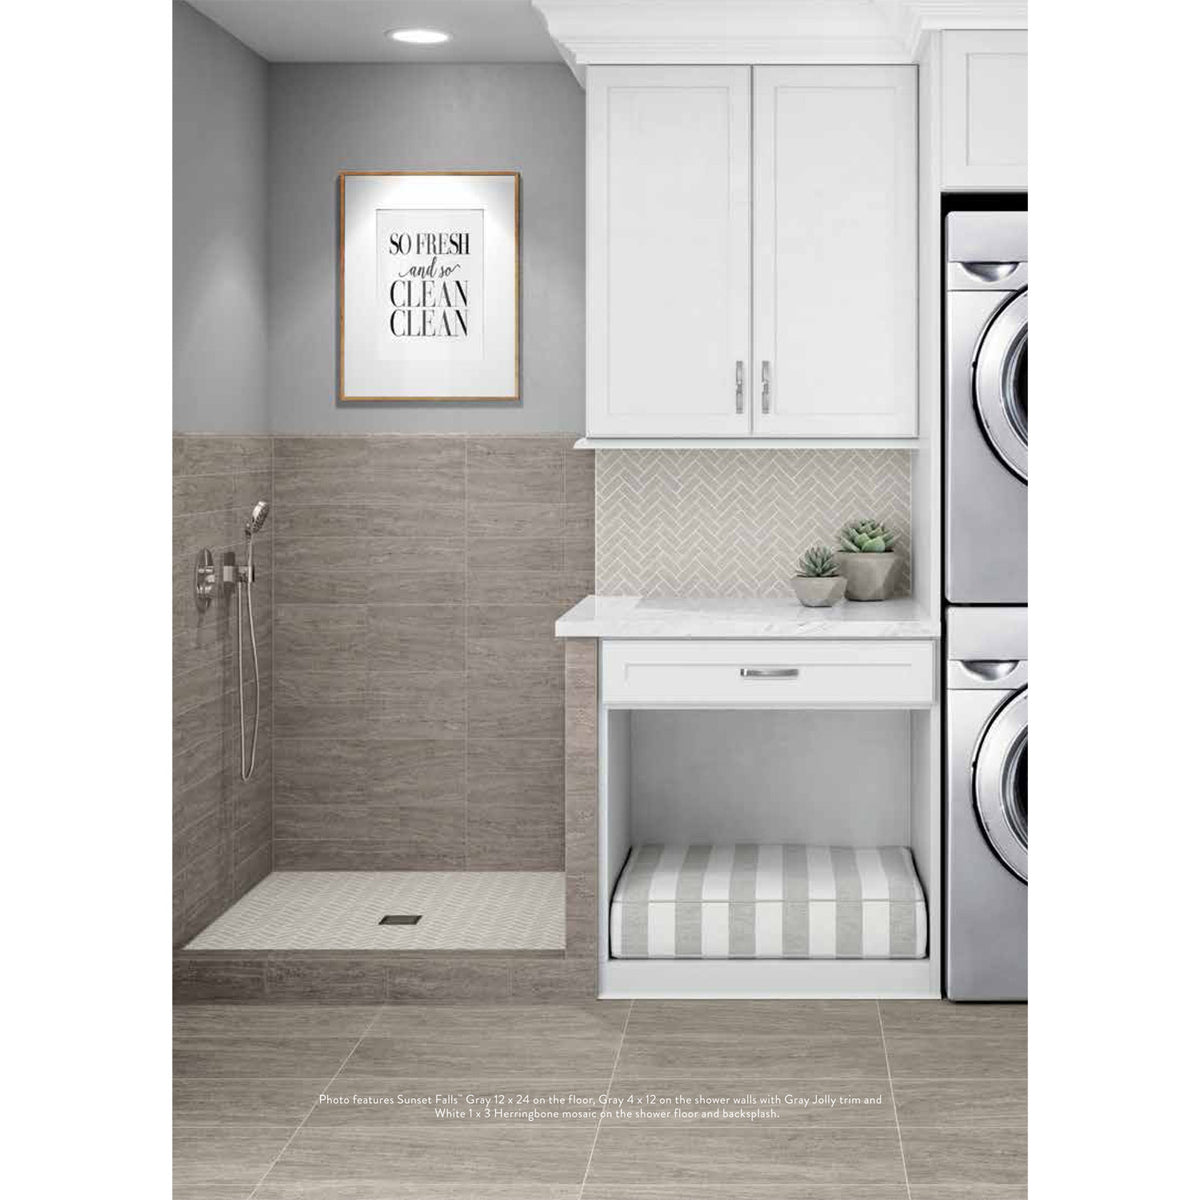 American Olean - Sunset Falls 4&quot; x 12&quot; Wall Tile - Gray SF17 Installed